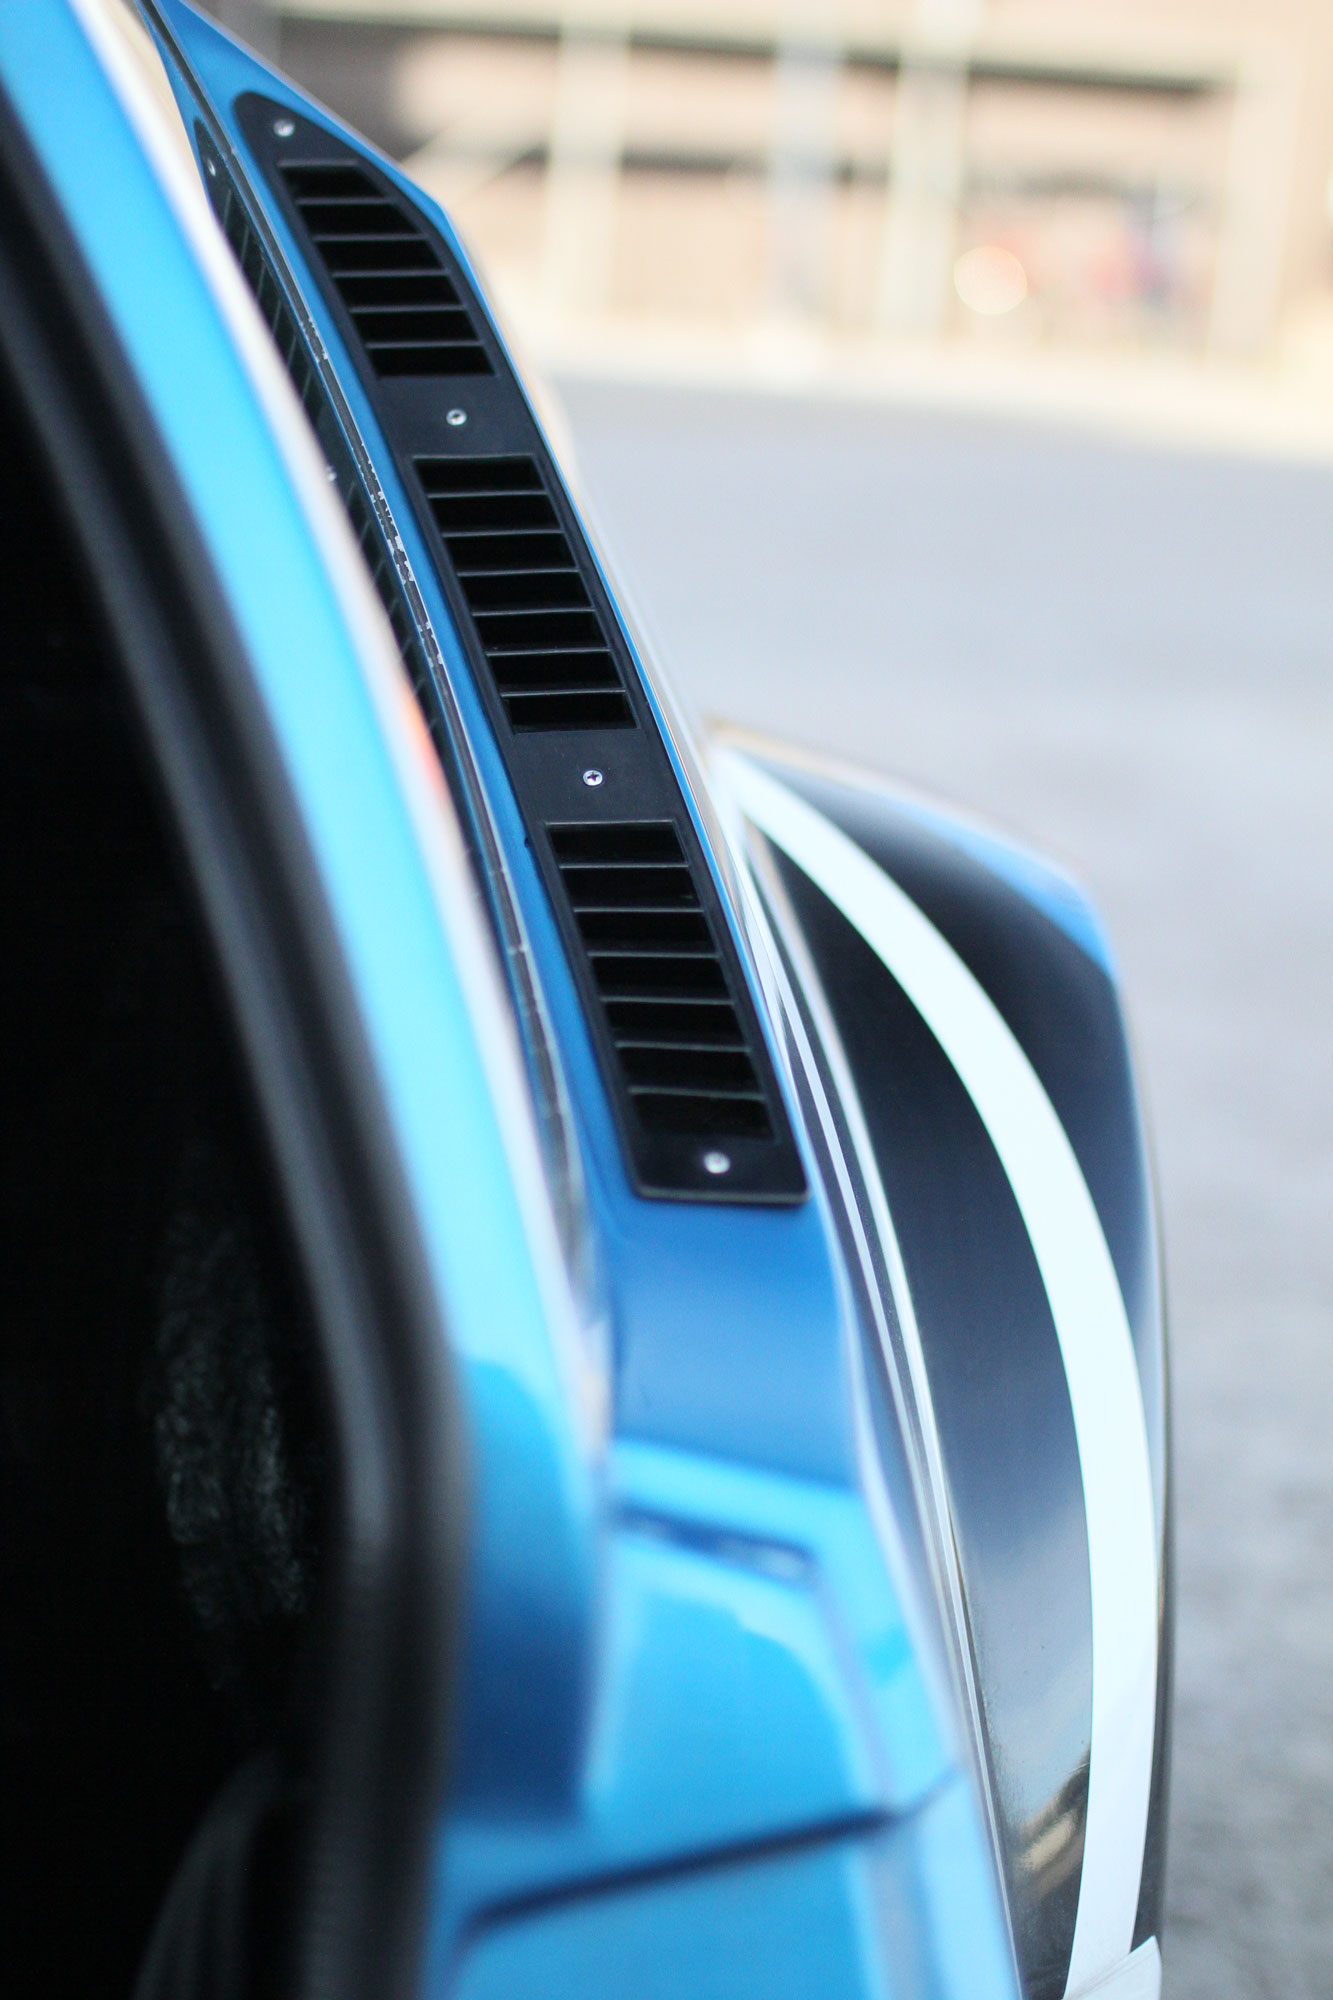 The Air Intake just behind the drivers door in the Renault Alpine A310